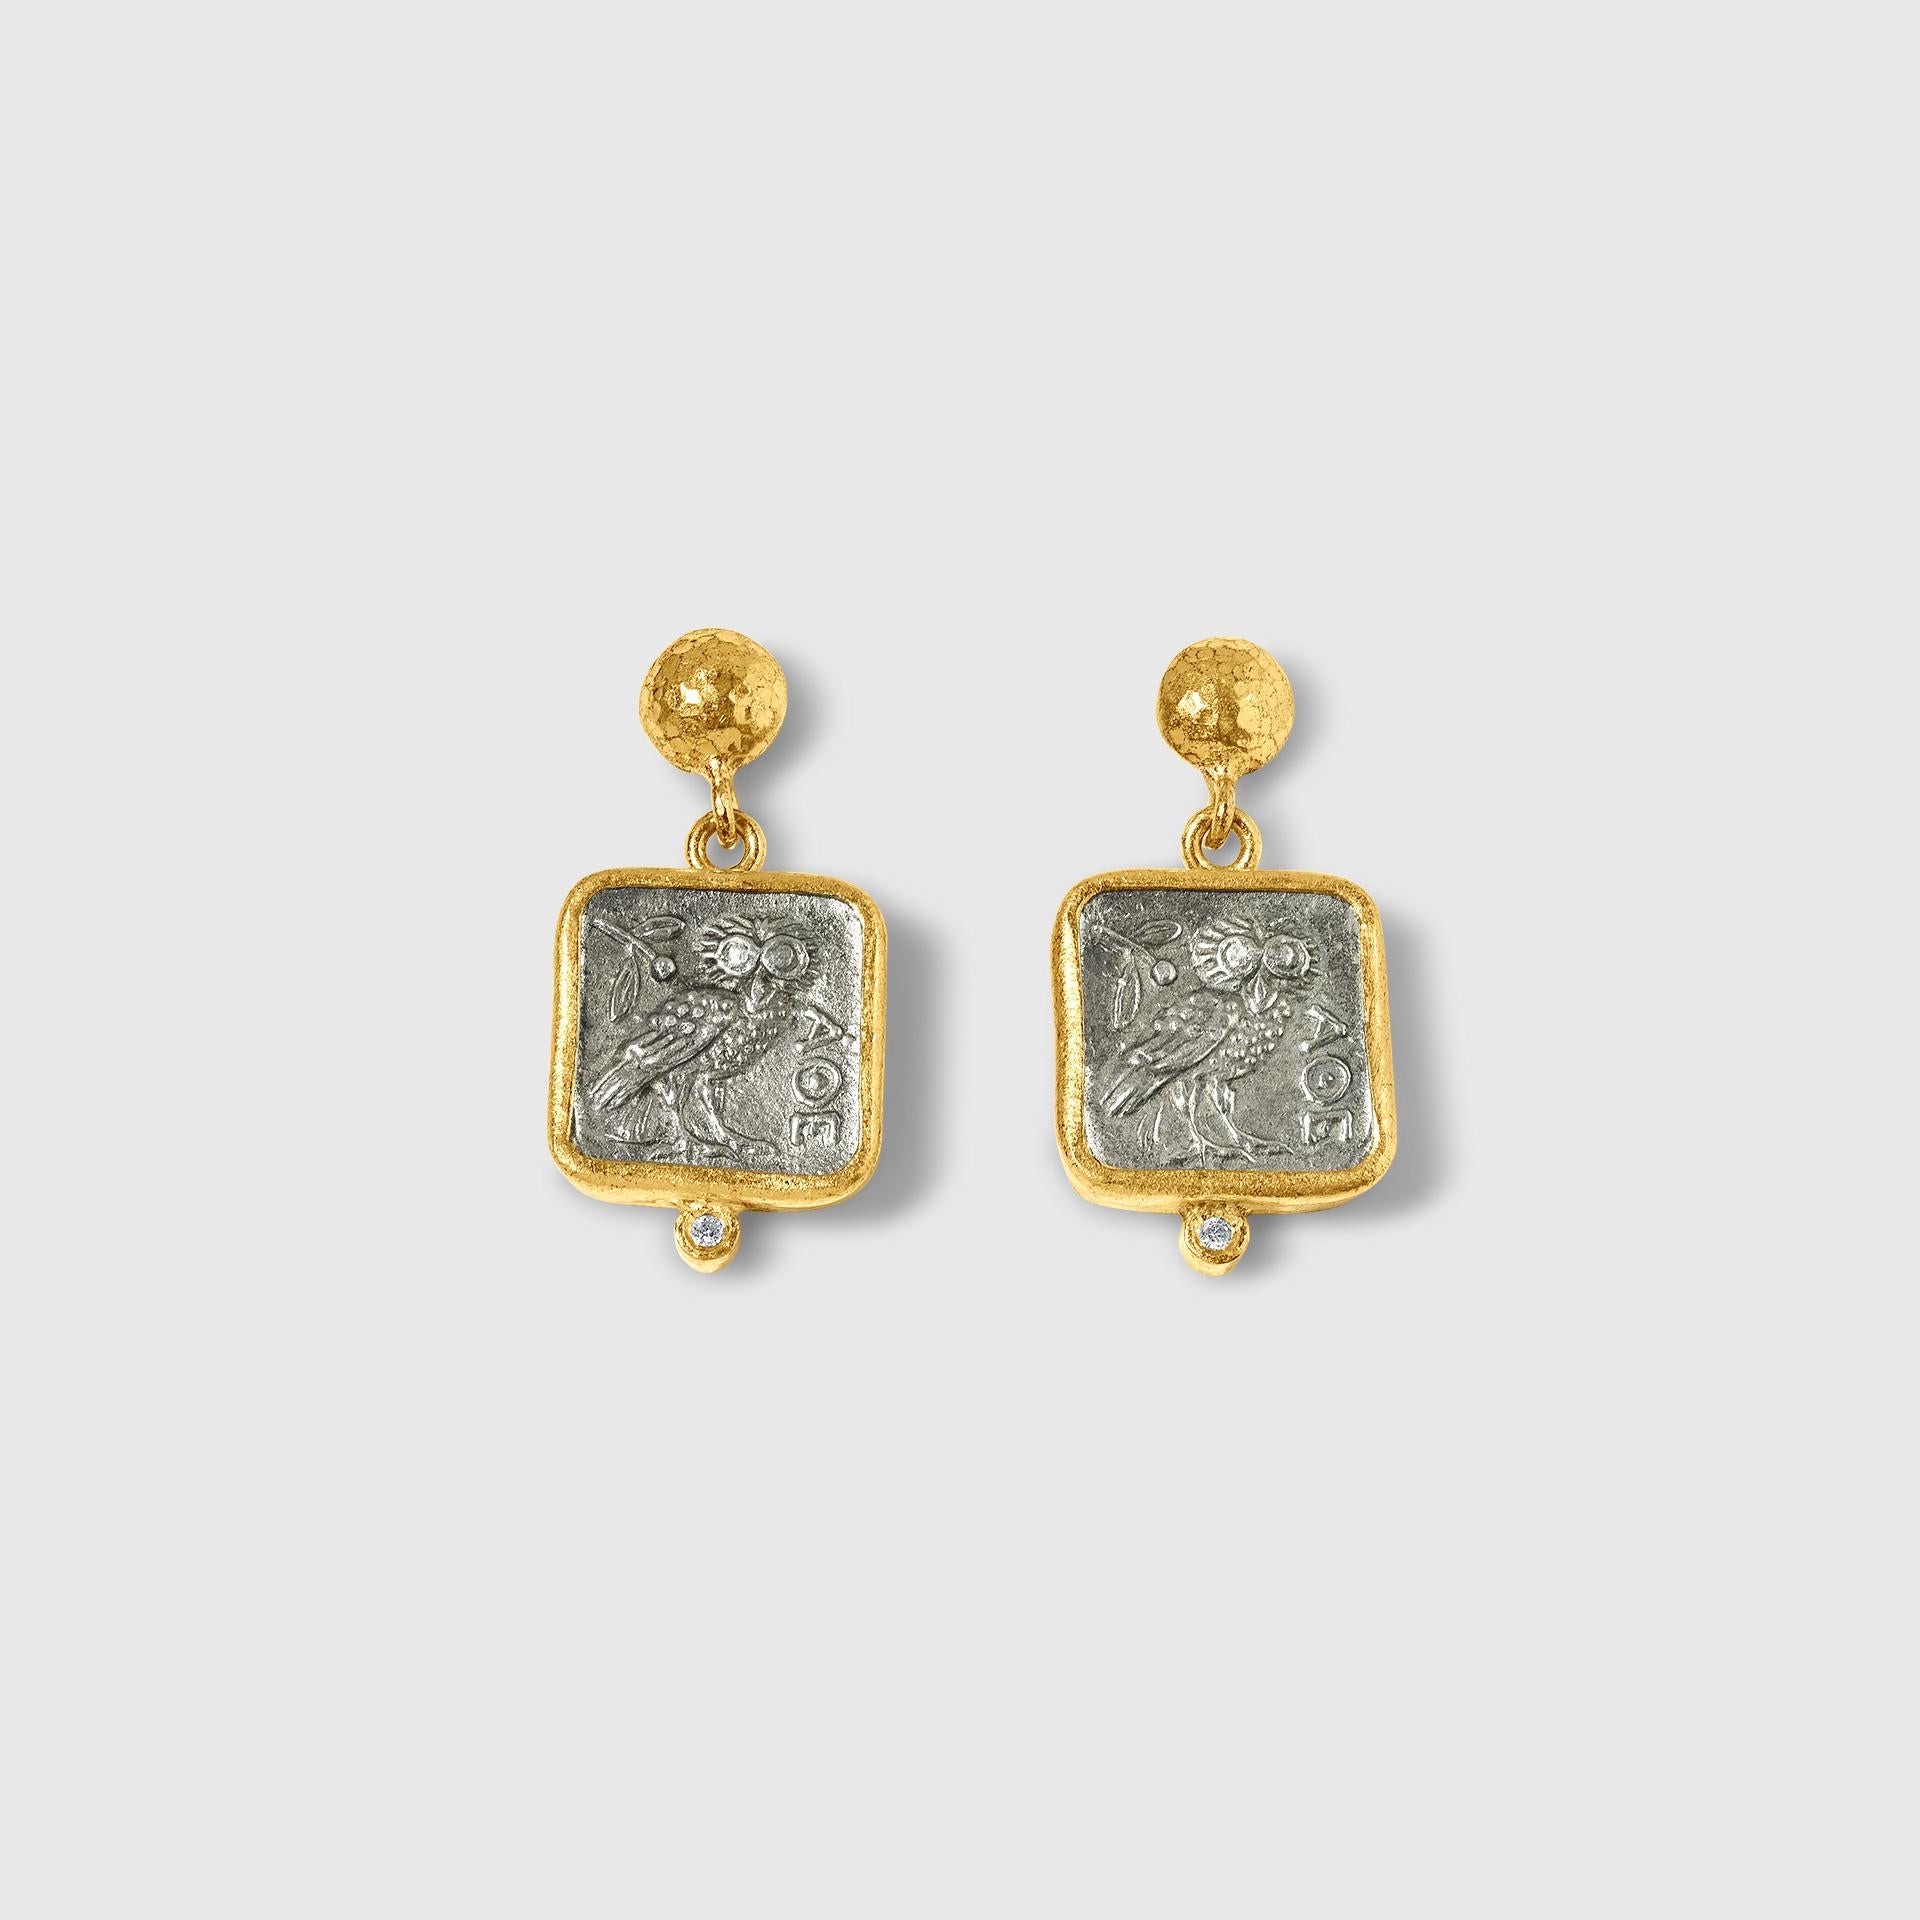 Square, Athena's Owl Earrings with Diamond Detail, in 24kt Gold and Sterling Silver by Prehistoric Works of Istanbul, Turkey. Length: 24mm (.9